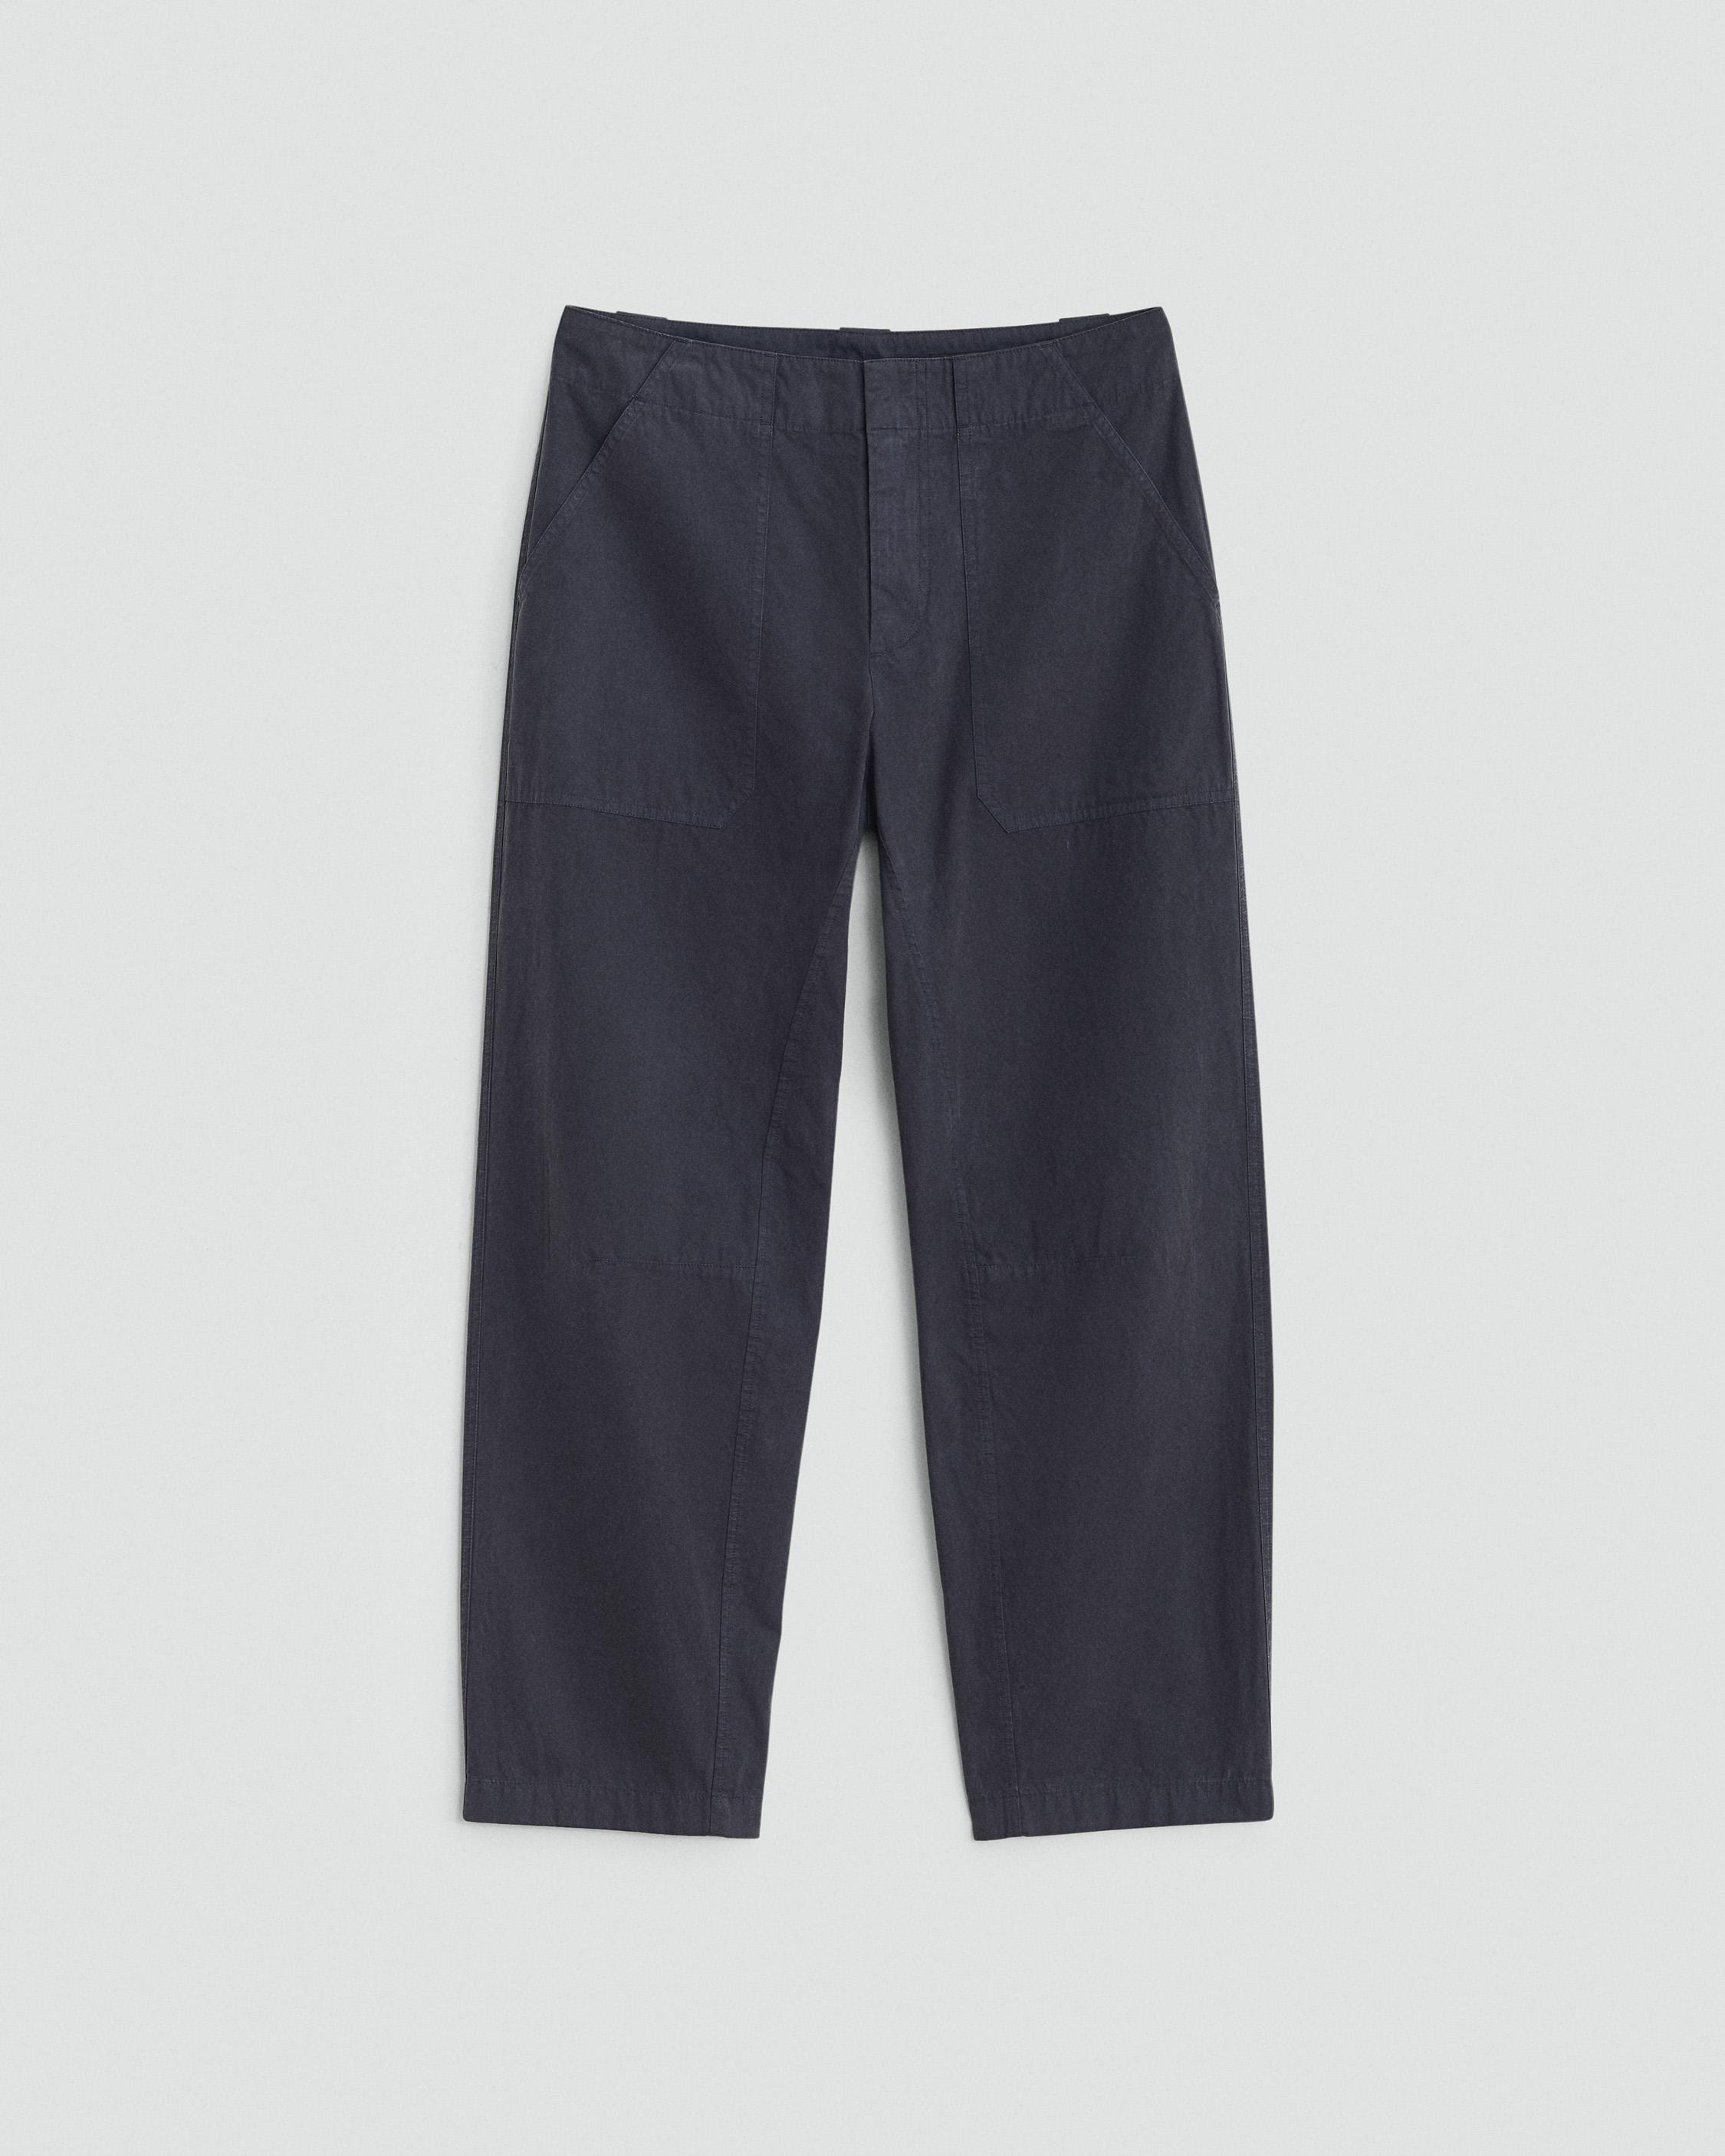 Leyton Workwear Cotton Pant
Relaxed Fit - 1